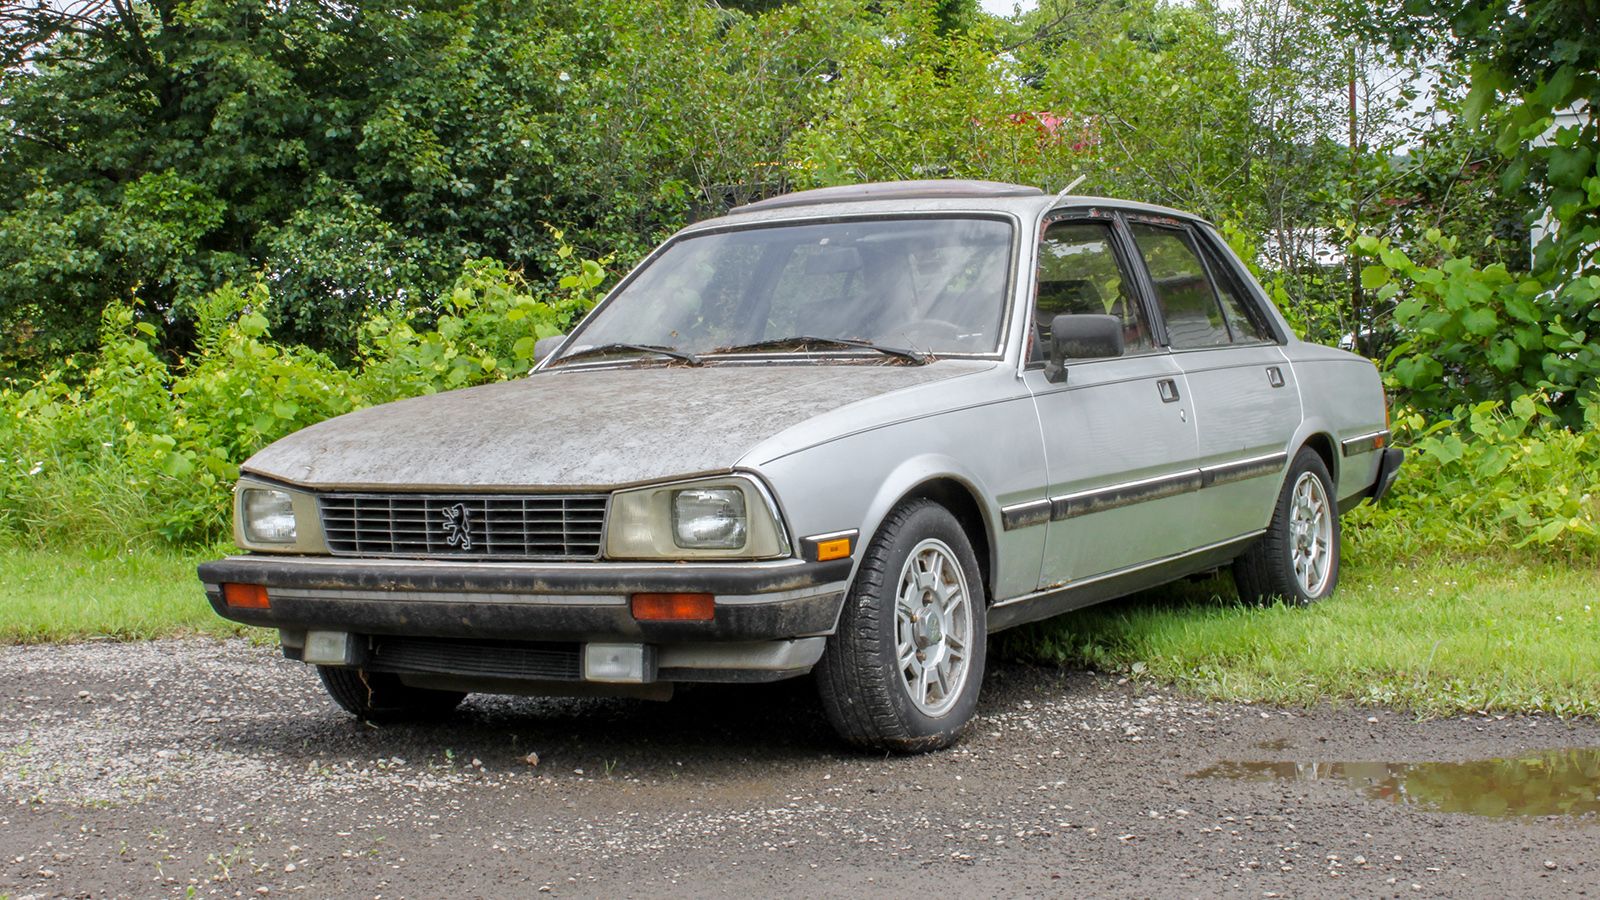 Classic Peugeot 505 Turbo Diesel spotted on the street: photos and